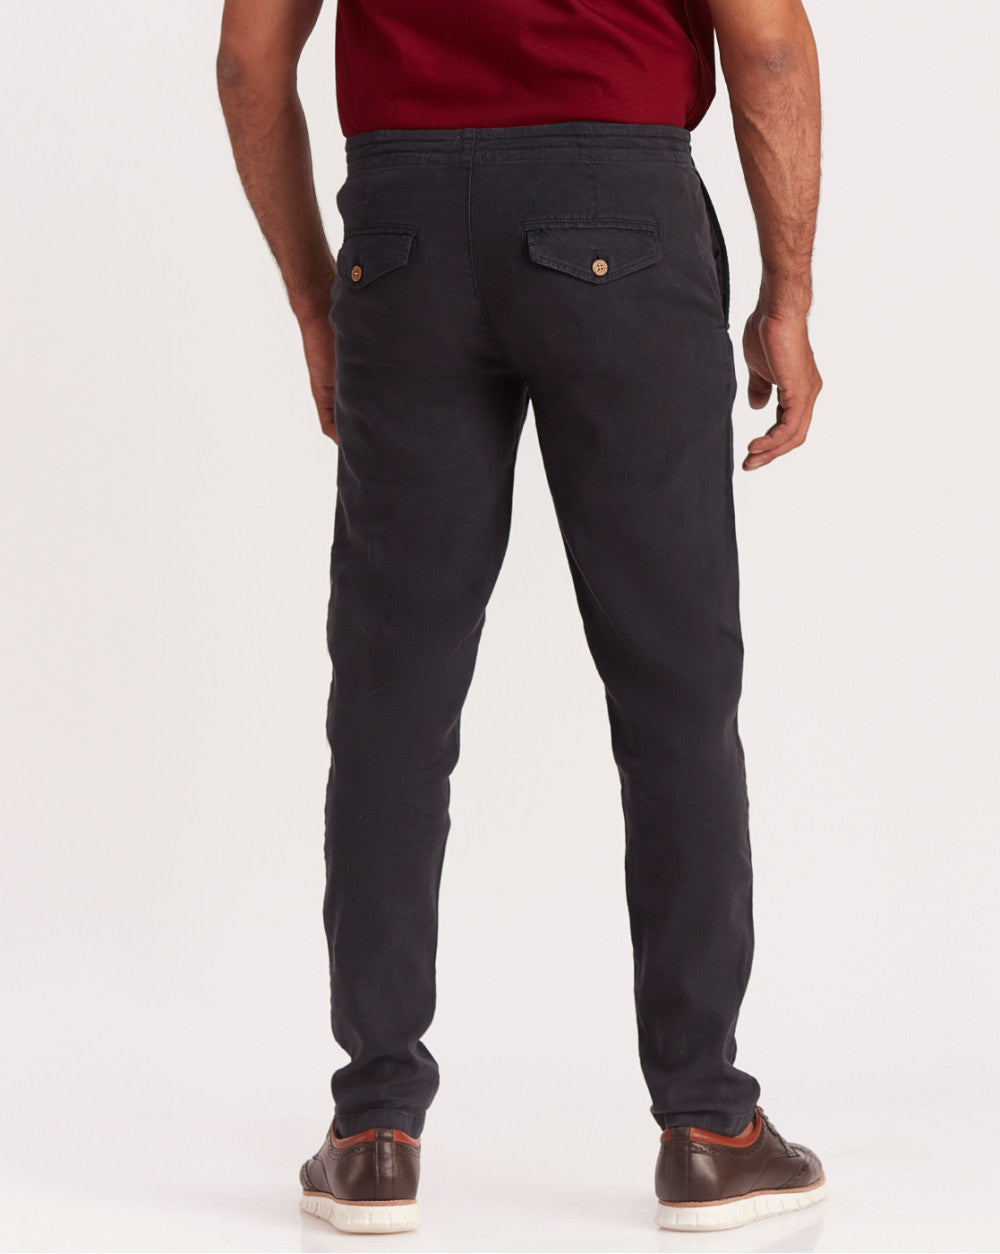 Tapered Fit Lounge Style Joggers - Jet Black